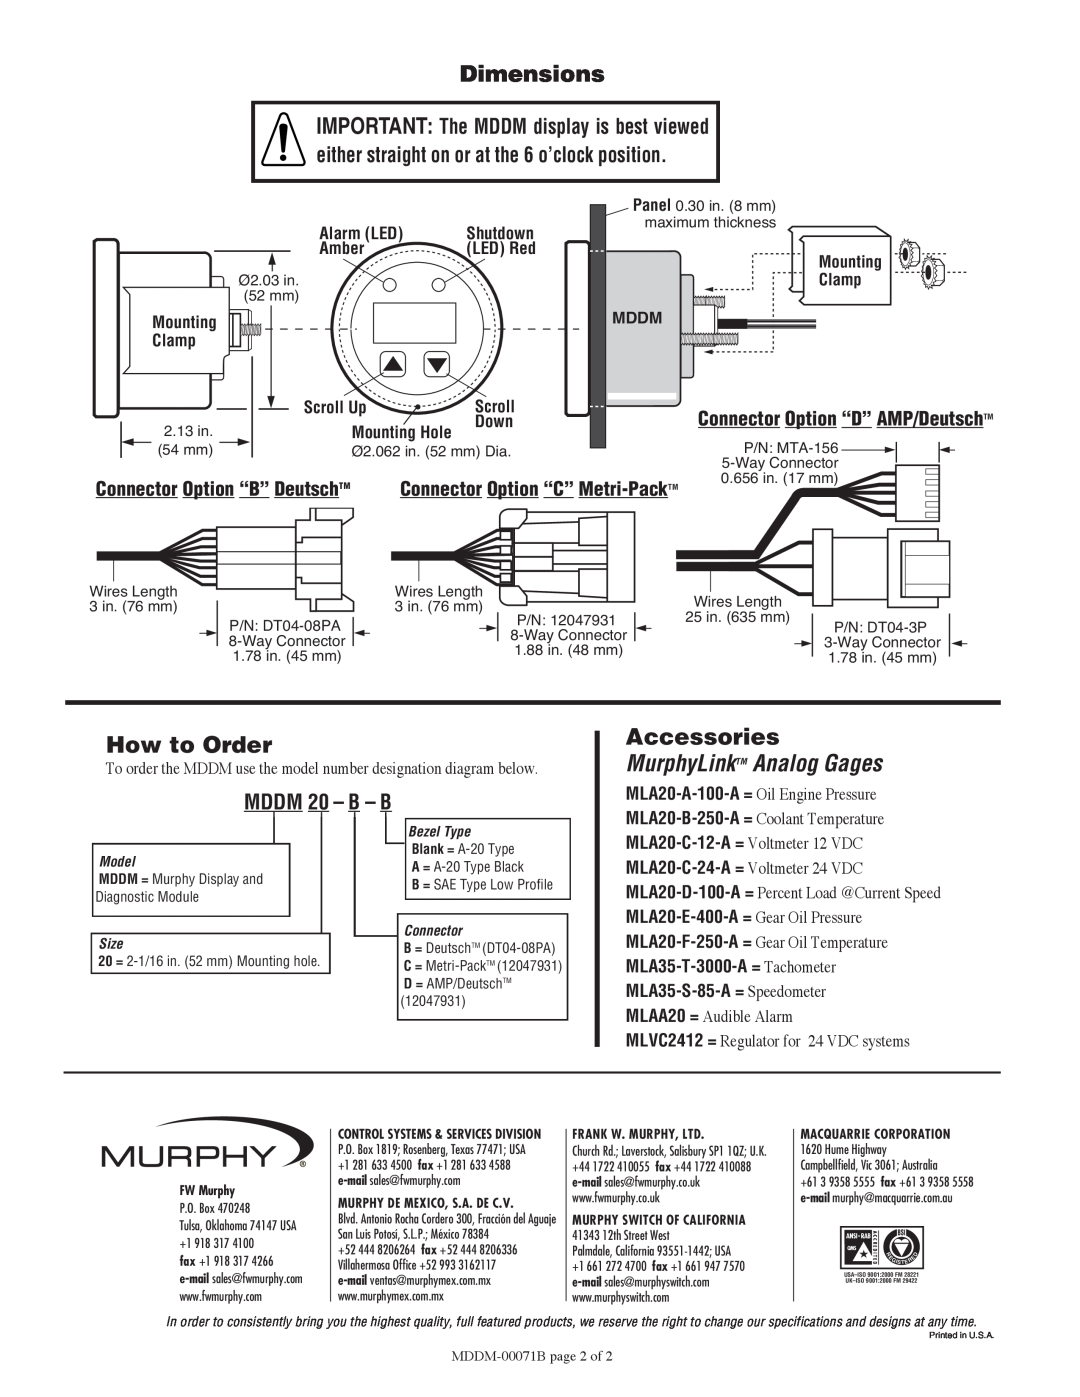 Murphy specifications Dimensions, How to Order, Accessories, MurphyLinkTM Analog Gages, MDDM 20 - B - B 